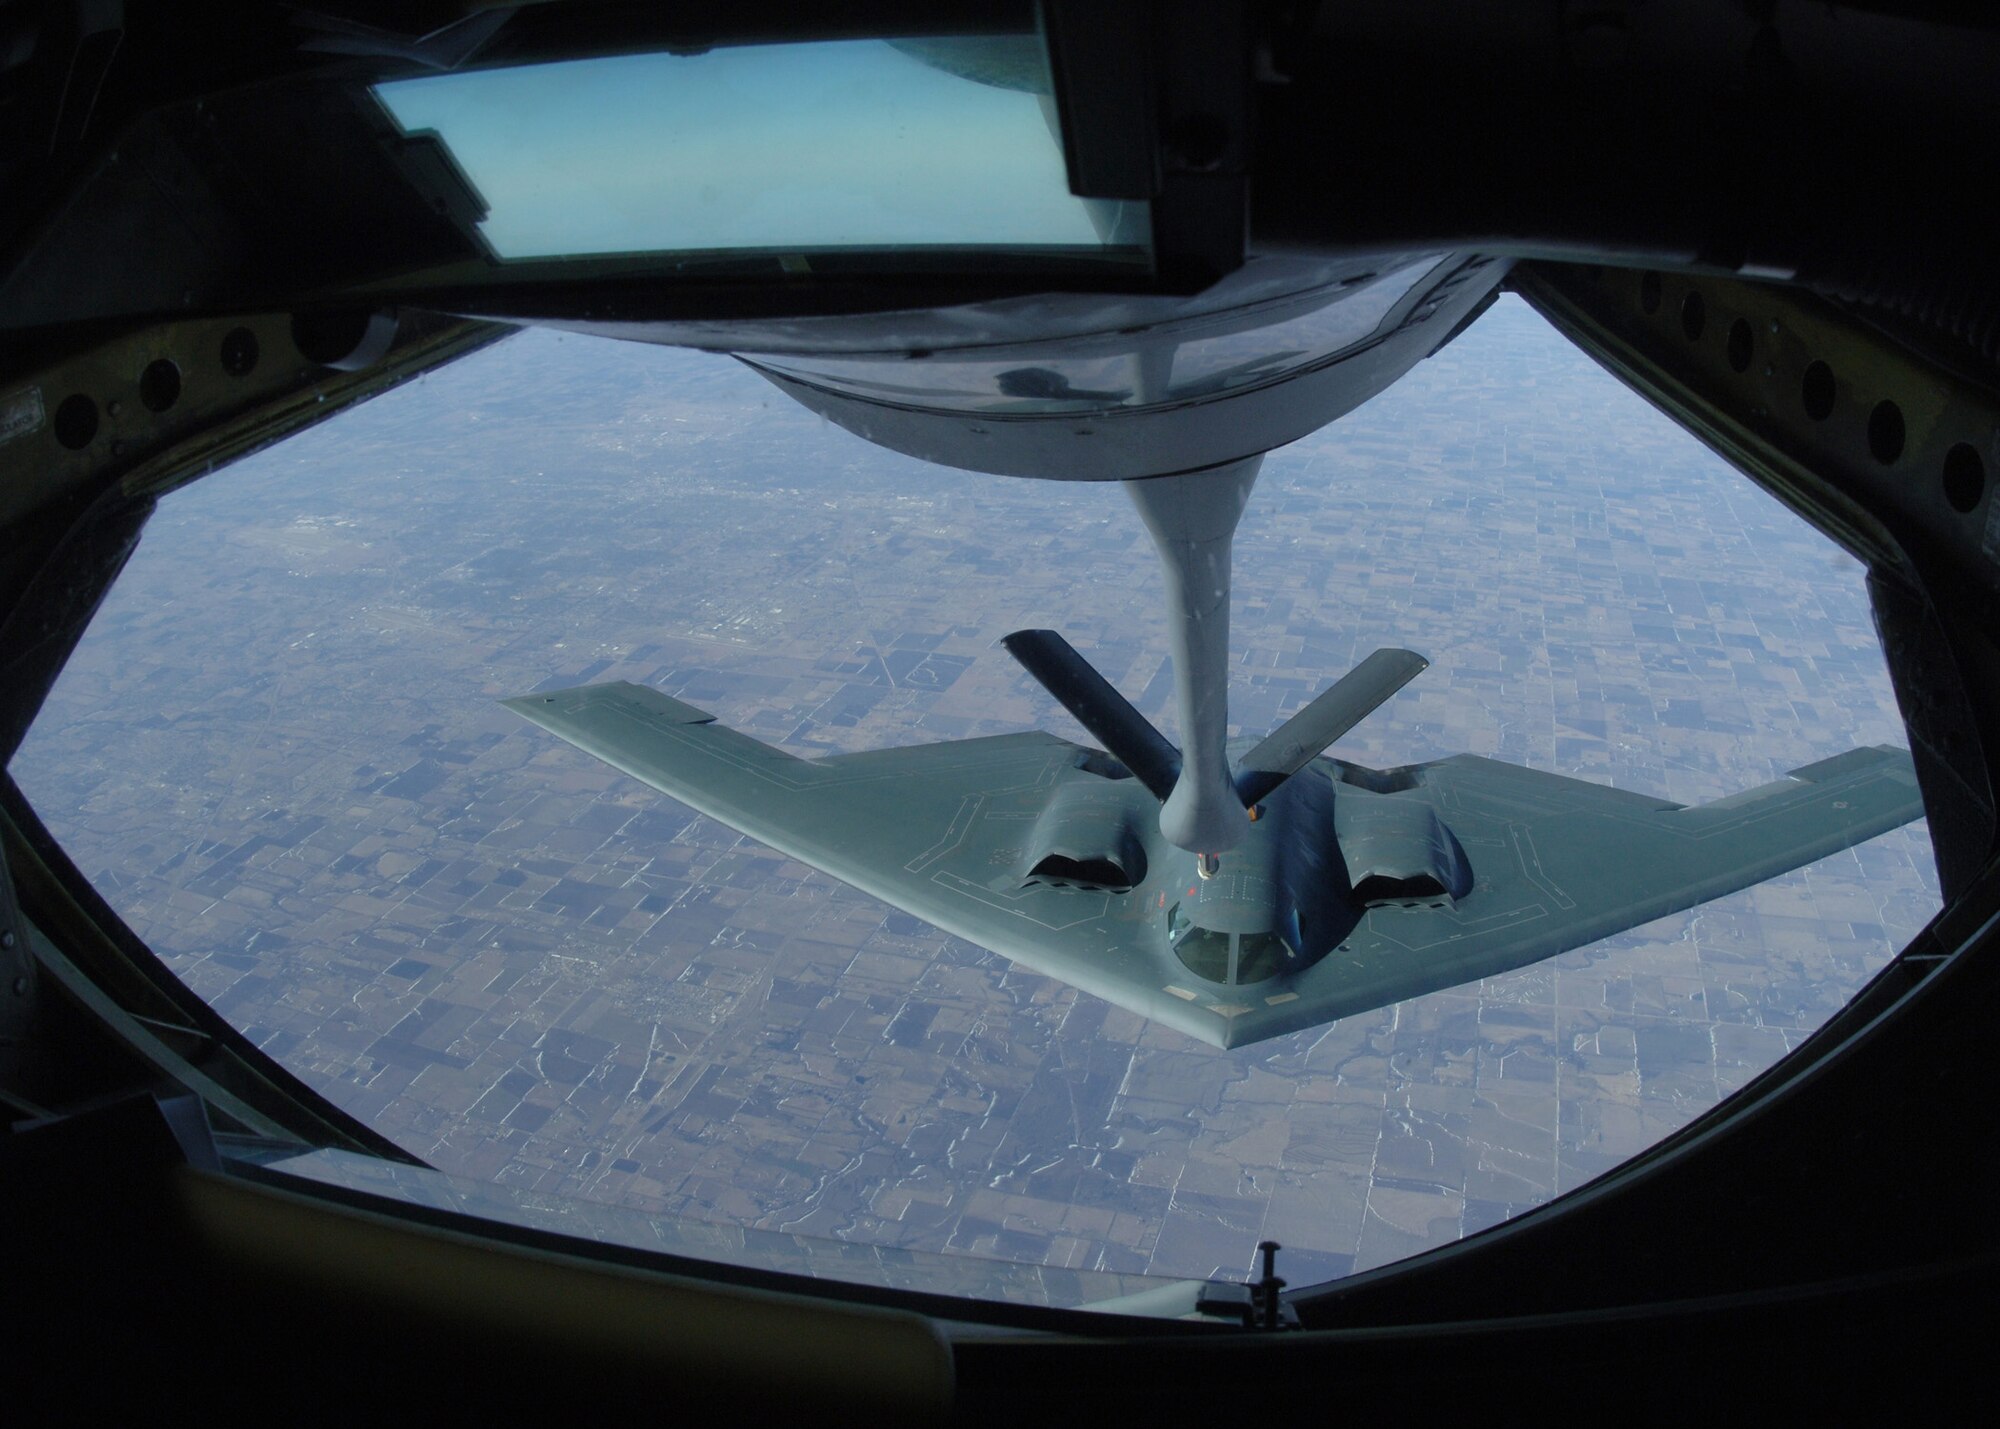 GRAND FORKS AIR FORCE BASE, N.D. - A B-2 Spirit approaches the boom of a 319th Air Refueling Wing KC-135 Stratotanker for aerial refueling over the skies of the Midwest. Able to fly more than 1,500 miles with 150,000 pound transferable of transferable fuel, the KC-135 enable global reach for U.S. and allied aircraft. (U.S. Air Force photo/Senior Airman Chad Kellum)